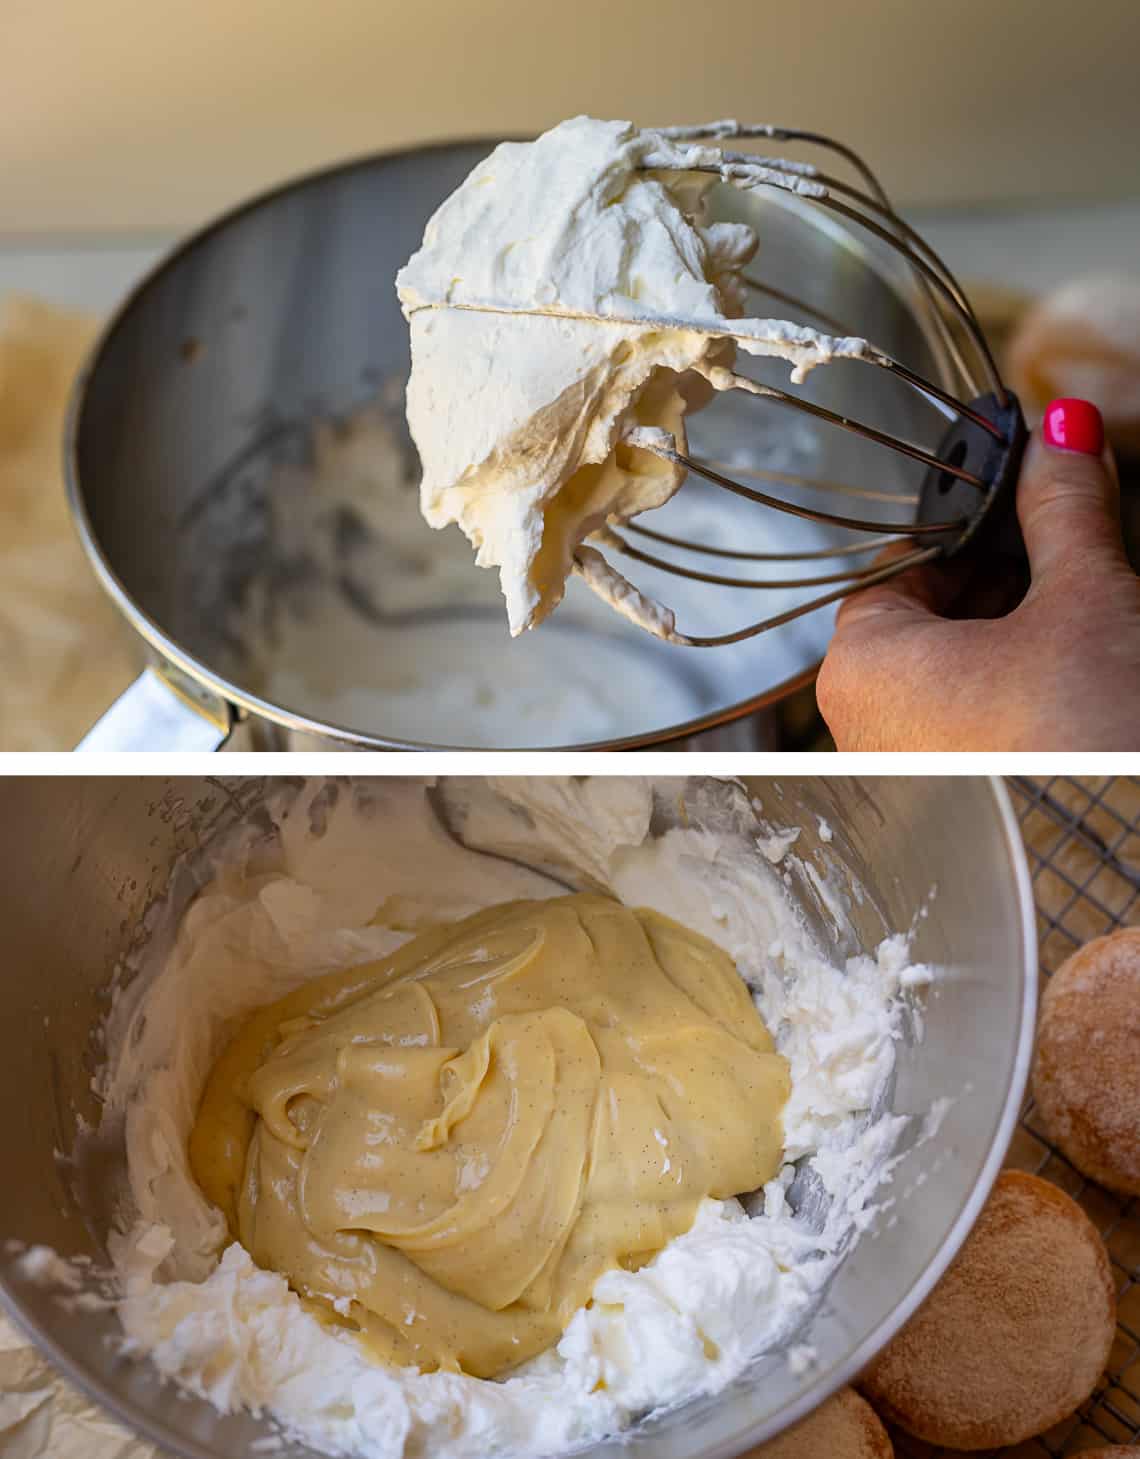 top mixer with stiff whipped cream after beating, bottom pastry cream poured into the mixer.